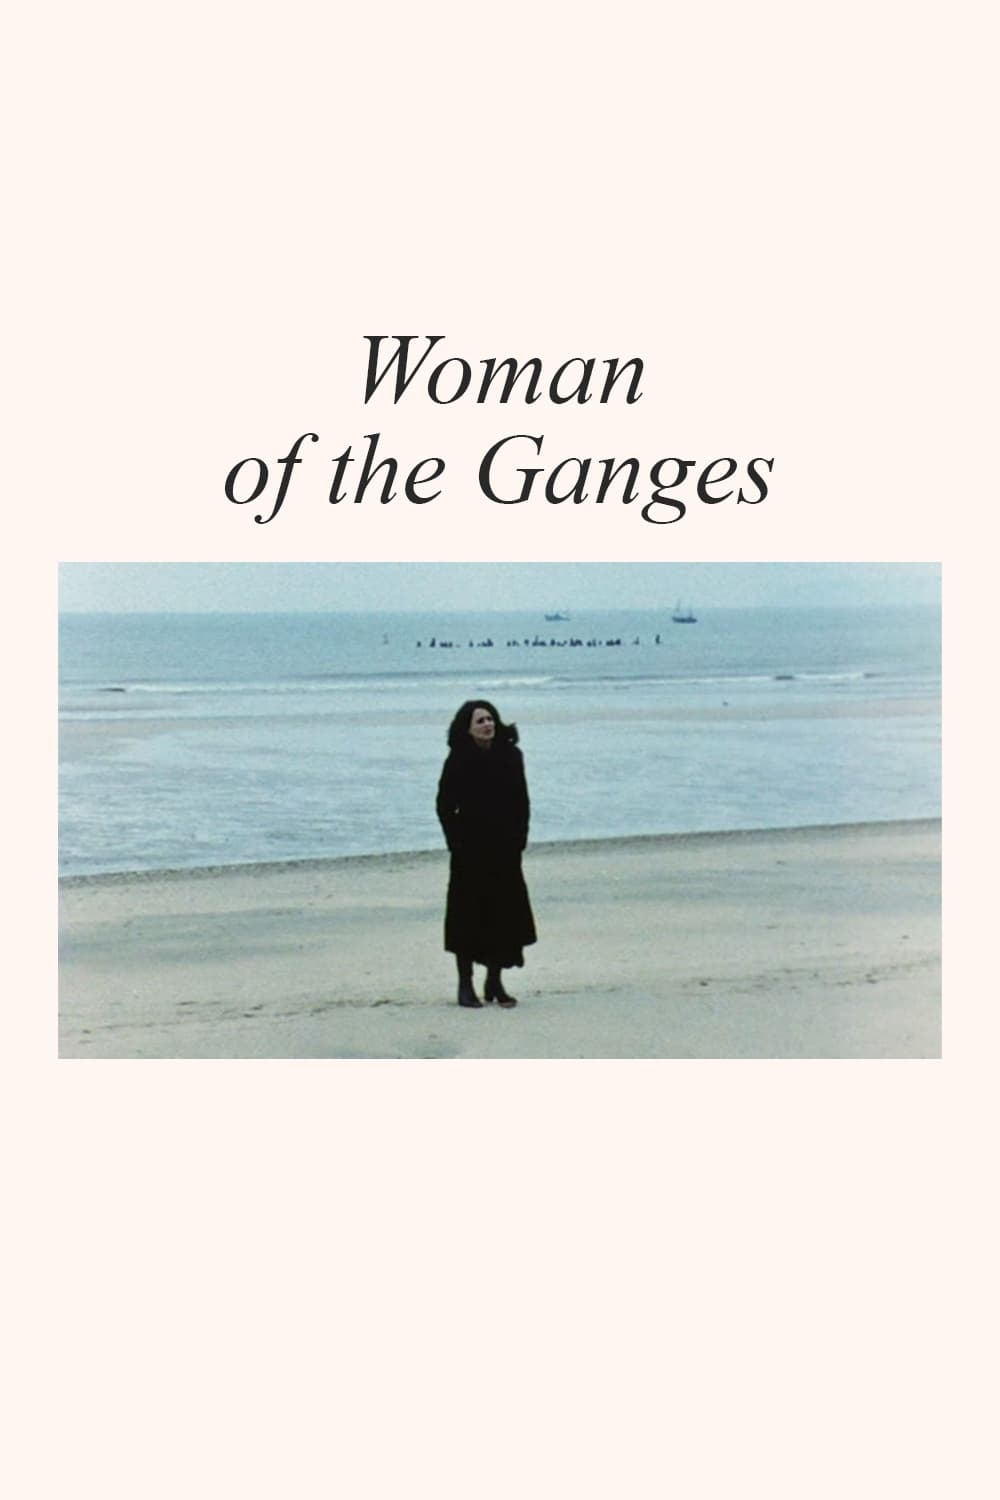 Woman of the Ganges (1974)